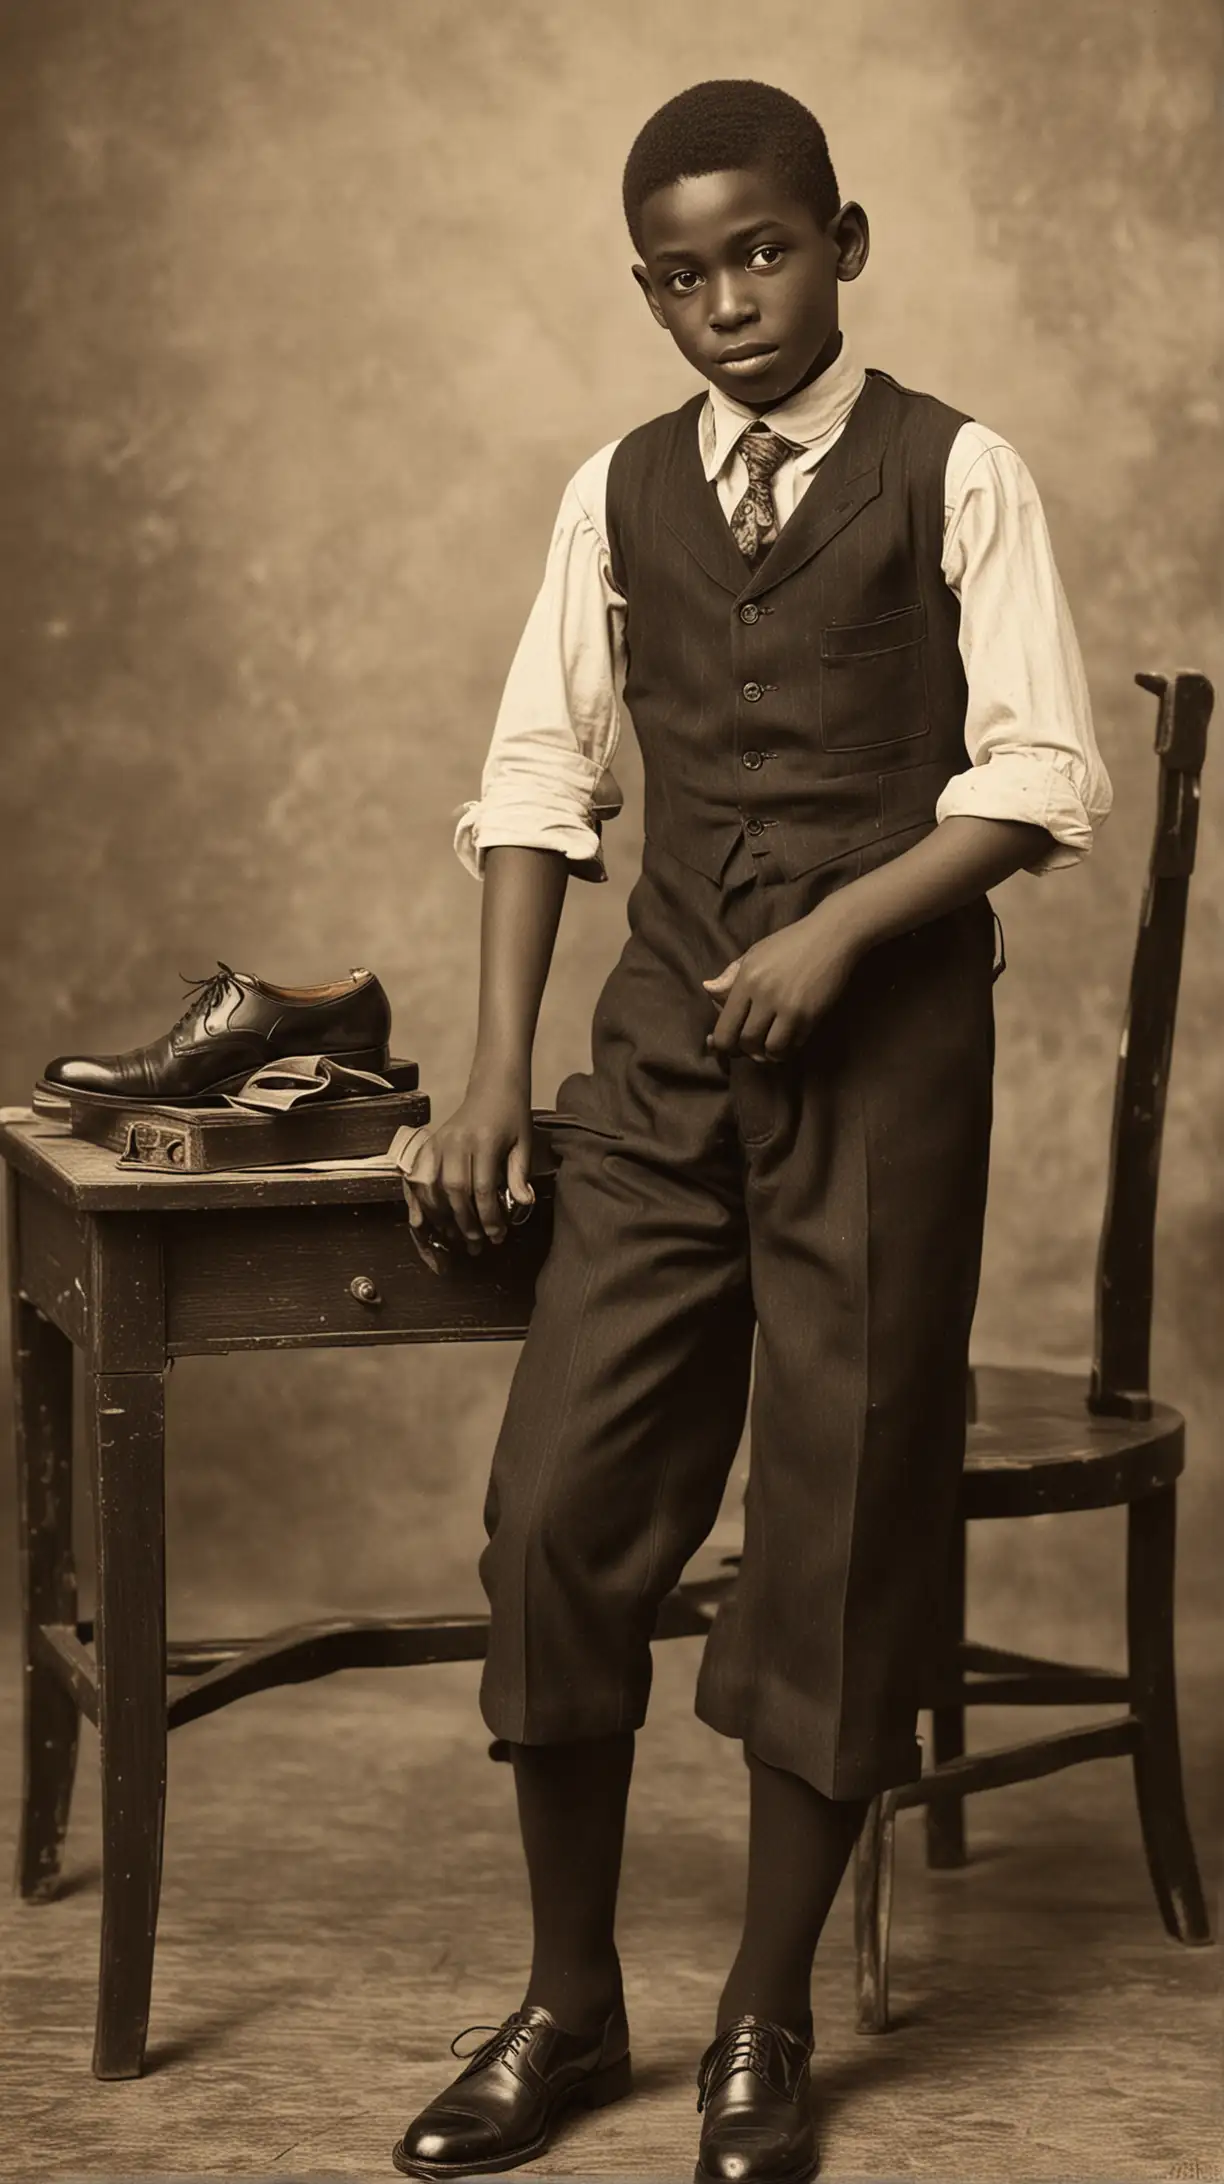 1925 Shoeshine Black Boy Working on Shoes on Busy City Street